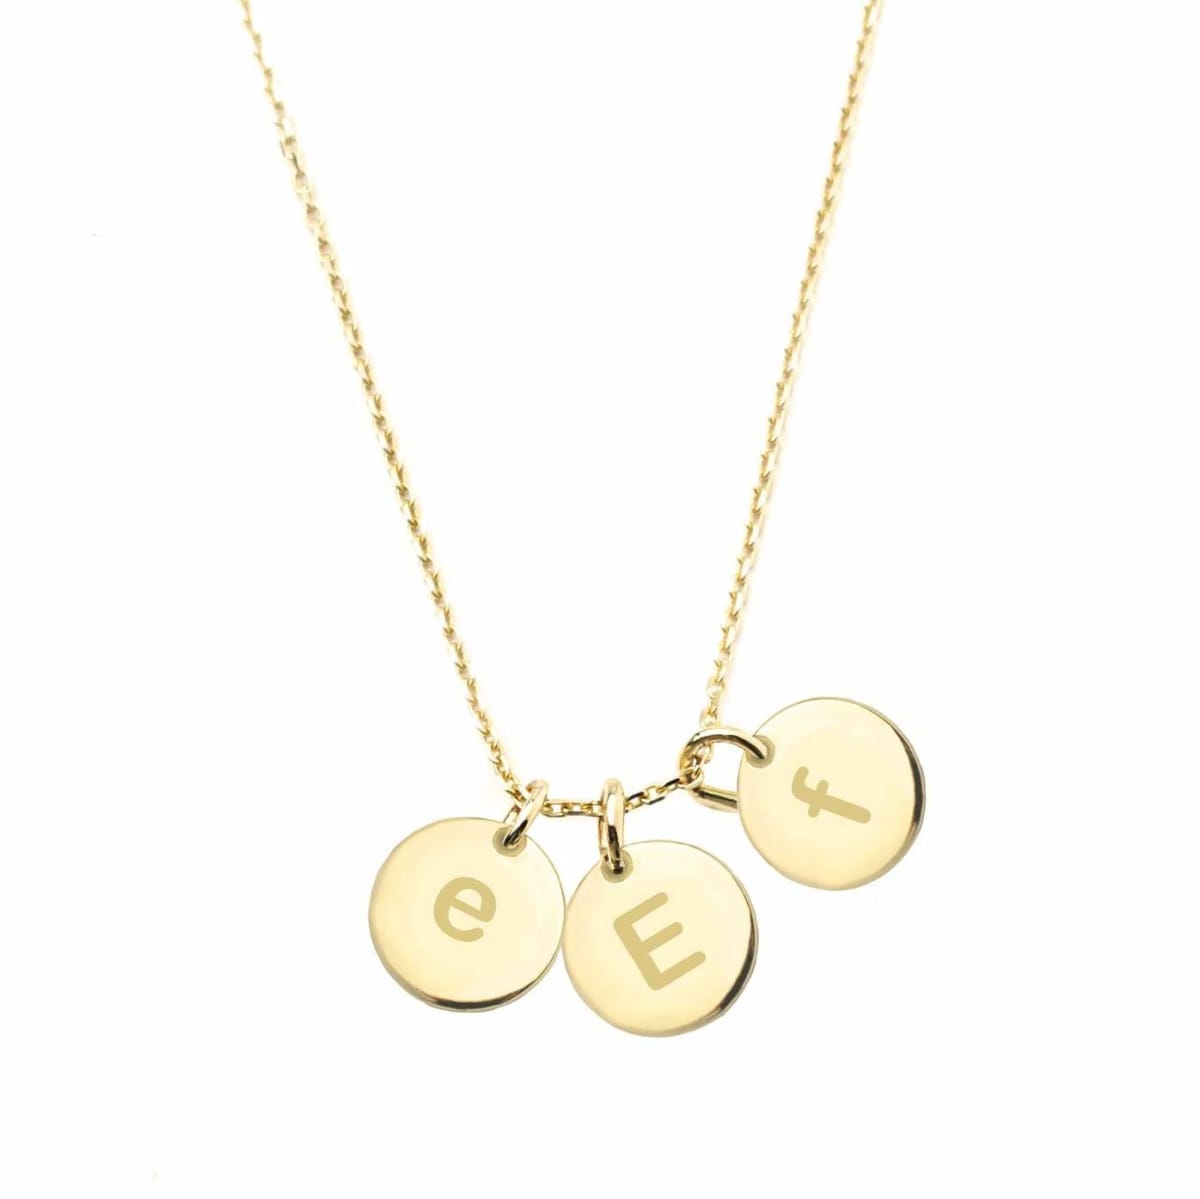 Solid Gold Personalized Disc Necklace